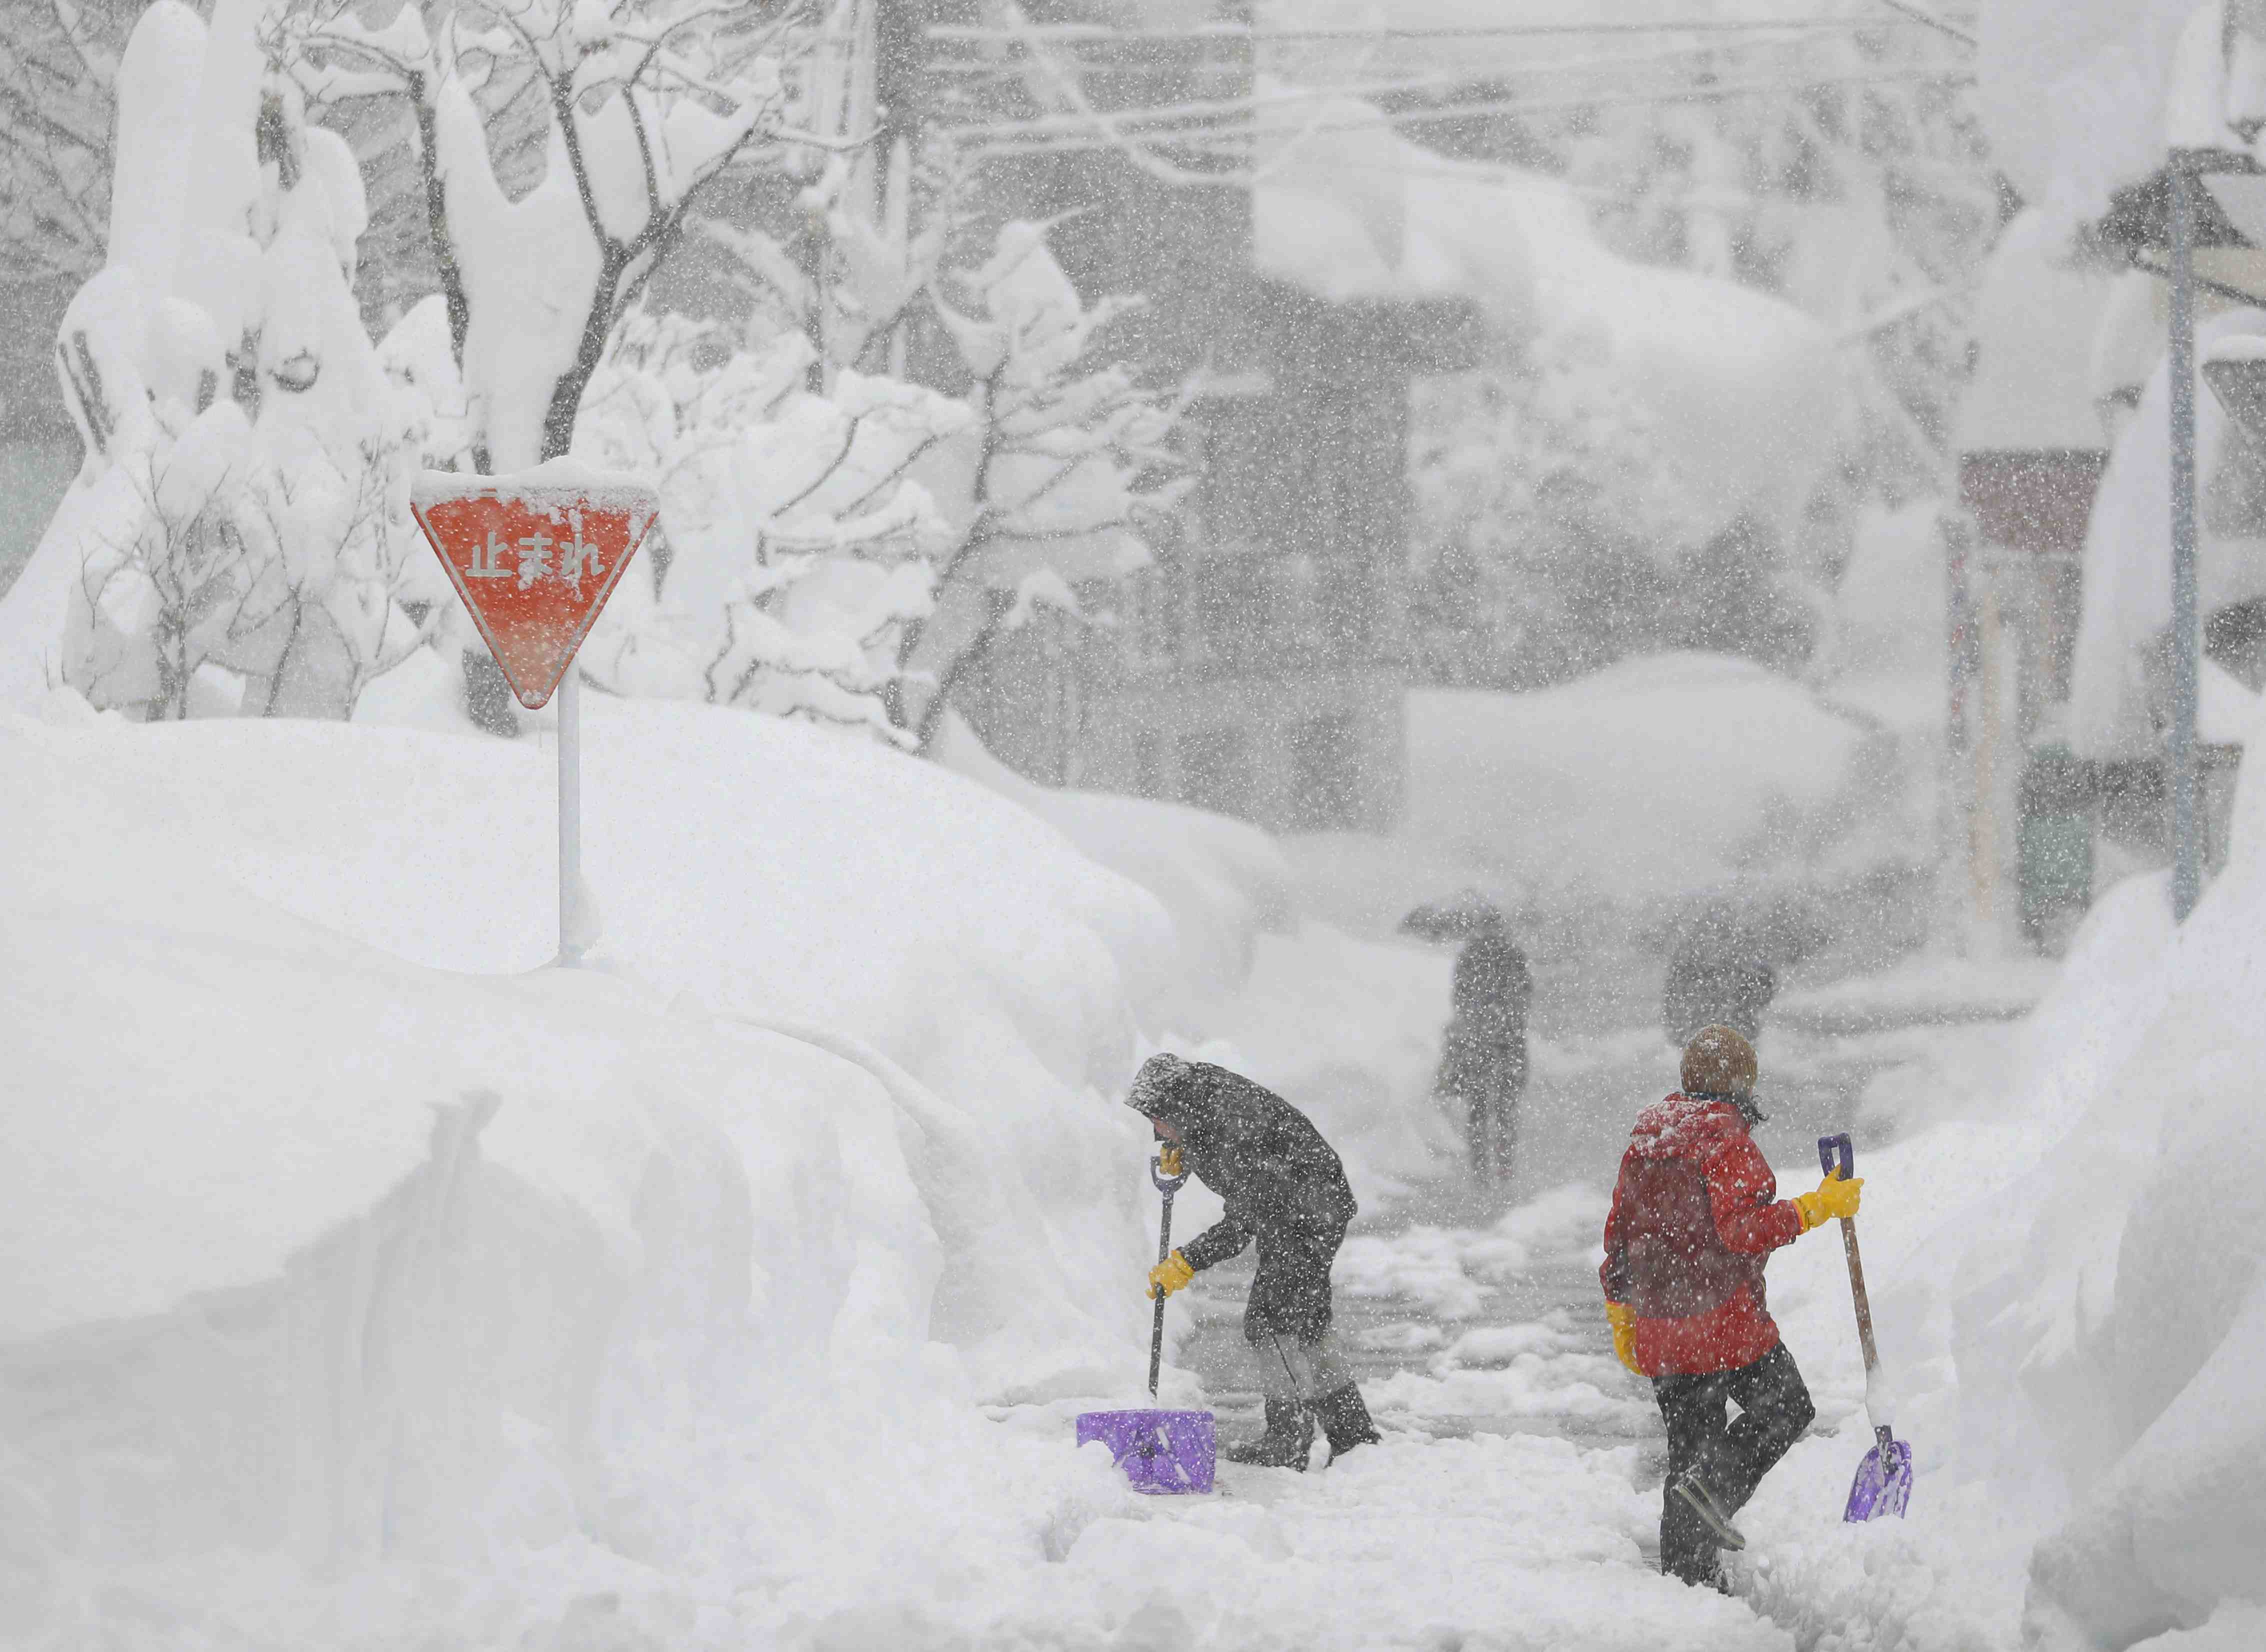 PHOTOS | Record Snowfall in Japan's Northern Regions, First Snow in Kyoto |  JAPAN Forward